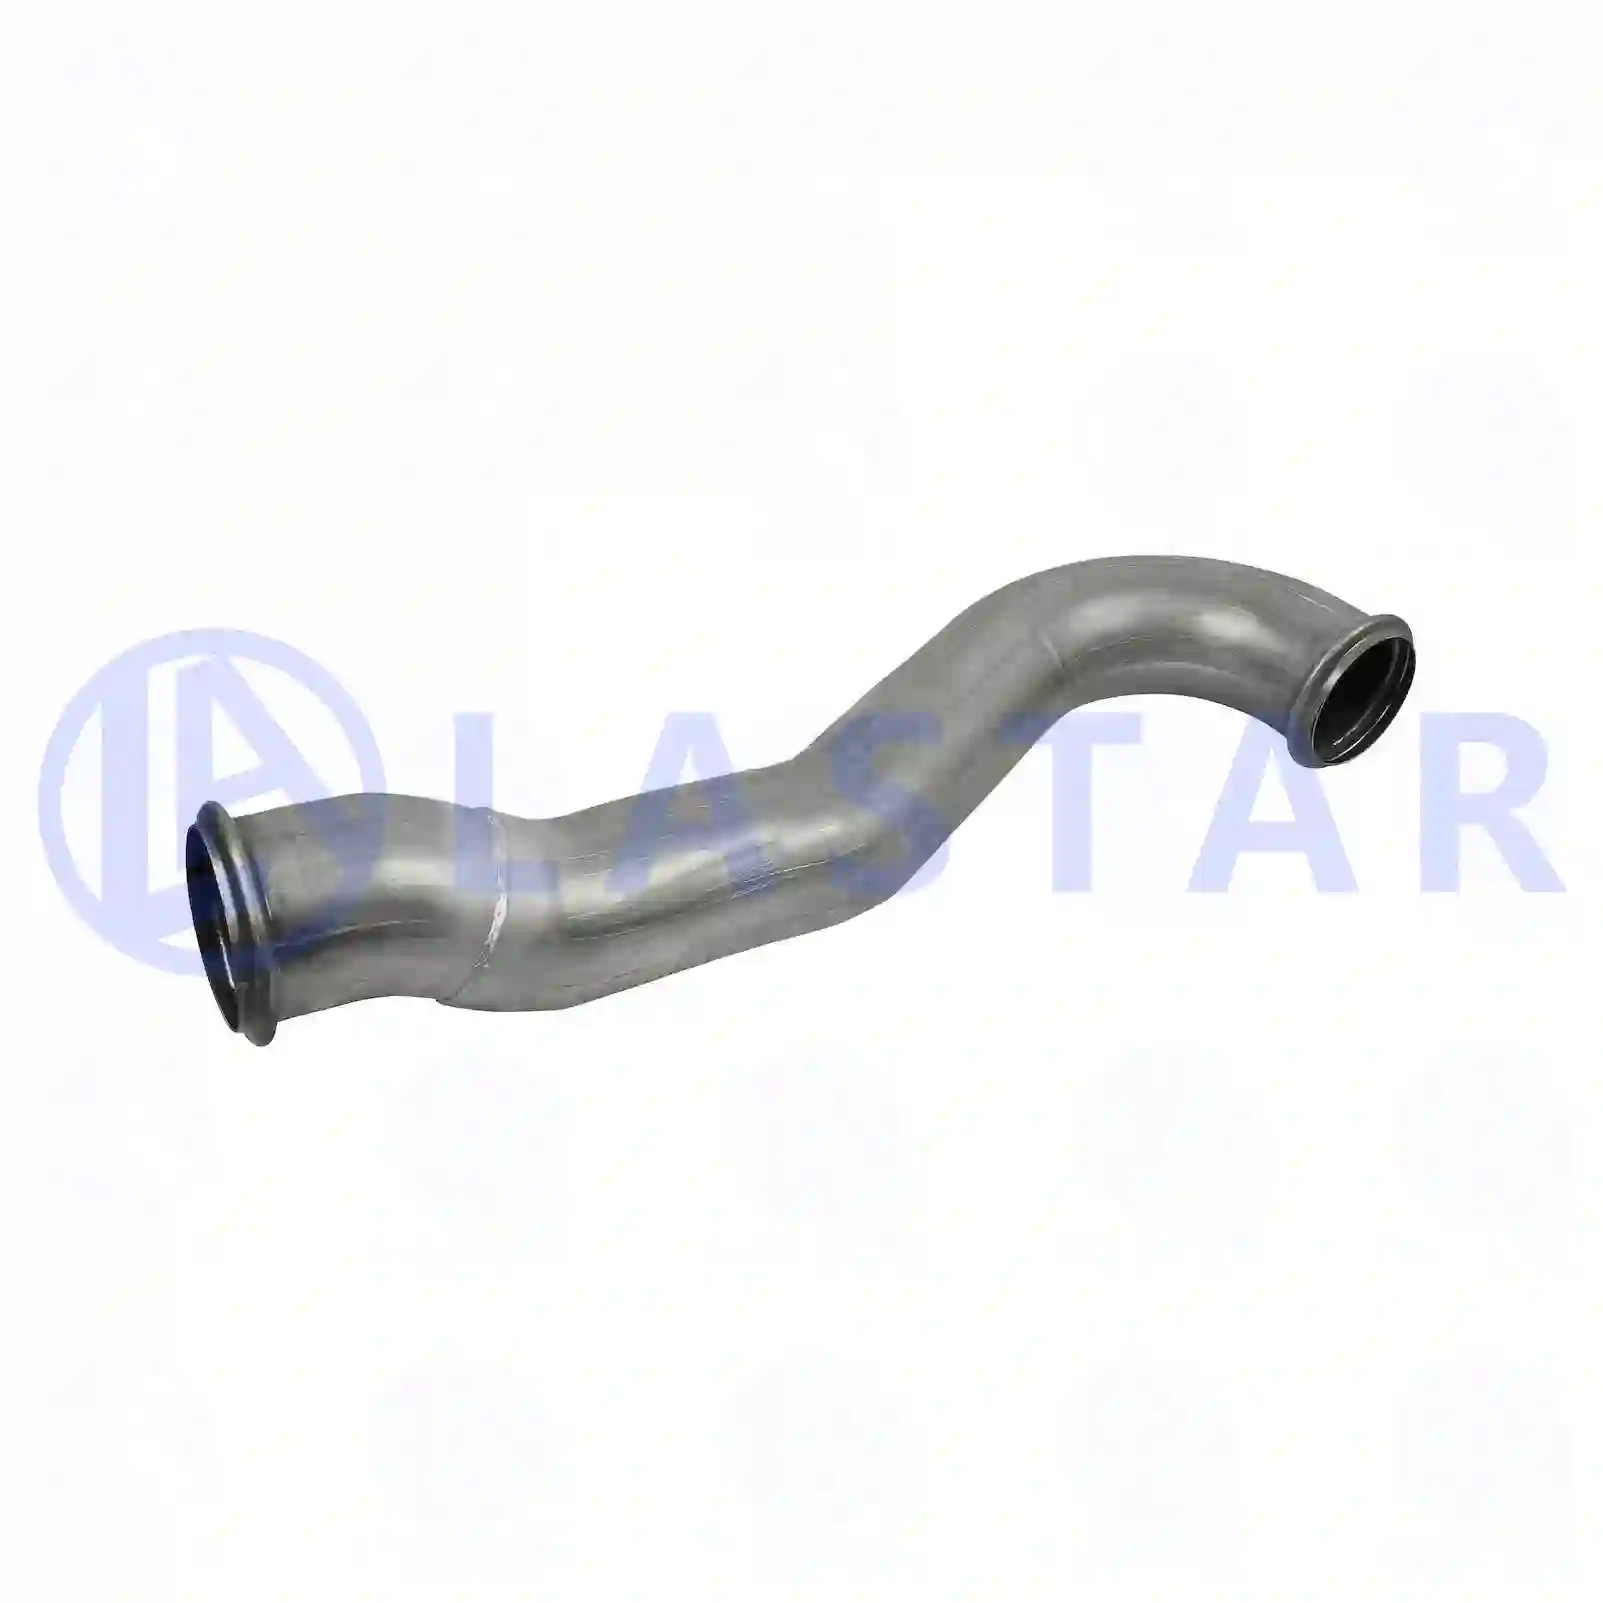 Exhaust pipe, 77706640, 7408159458, 8159458, ZG10295-0008 ||  77706640 Lastar Spare Part | Truck Spare Parts, Auotomotive Spare Parts Exhaust pipe, 77706640, 7408159458, 8159458, ZG10295-0008 ||  77706640 Lastar Spare Part | Truck Spare Parts, Auotomotive Spare Parts